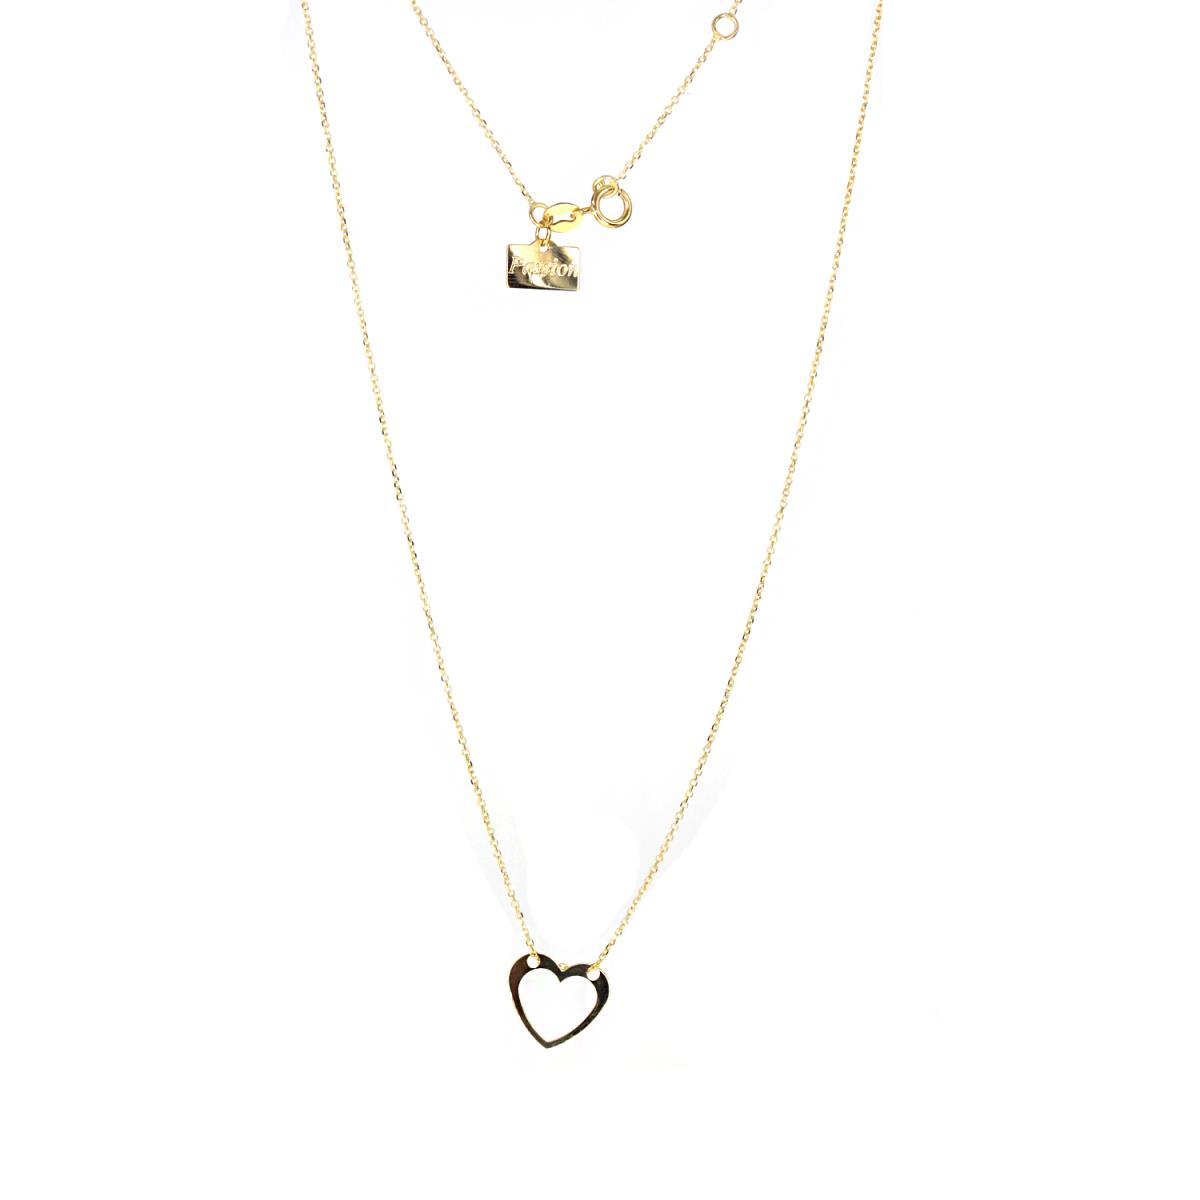 10K Yellow Gold Polished Open Heart Charm 15+1" Necklace with Passion Plate